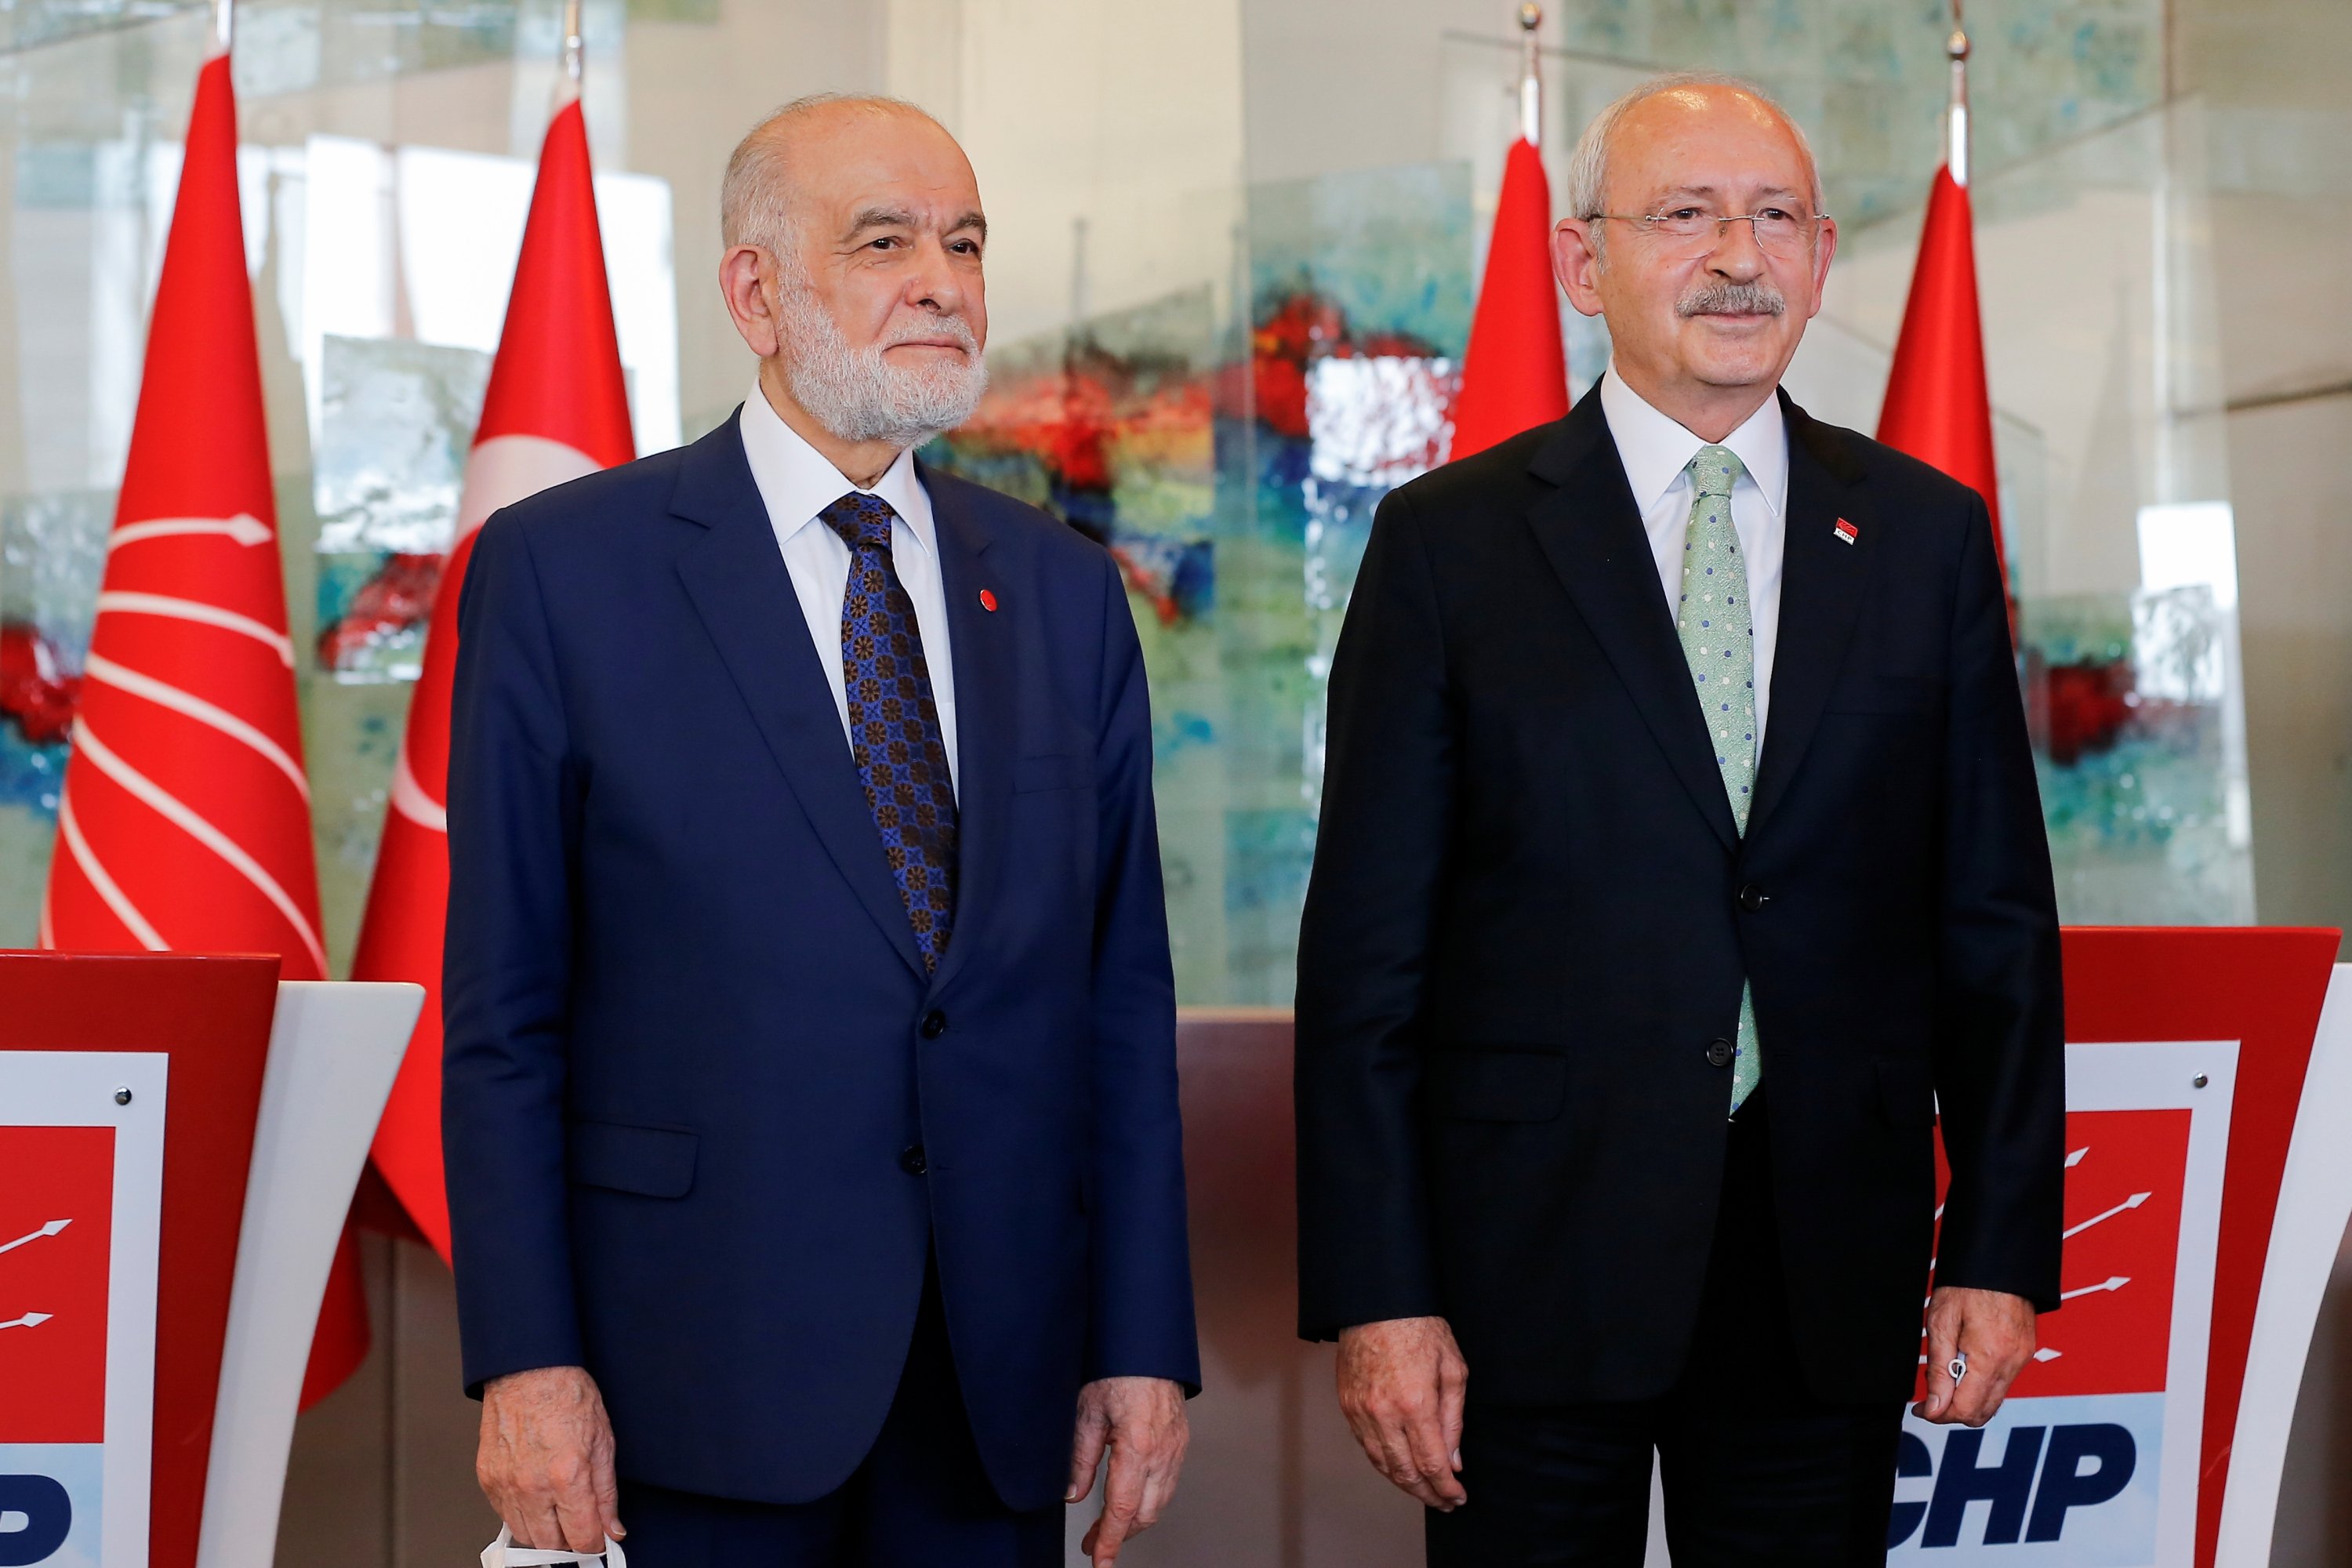 Felicity Party (SP) Chairperson Temel Karamollaoğlu (L) and main opposition Republican People's Party (CHP) Chairperson Kemal Kılıçdaroğlu pose following a news conference in capital Ankara, Turkey, Oct. 11, 2021. (Reuters Photo)